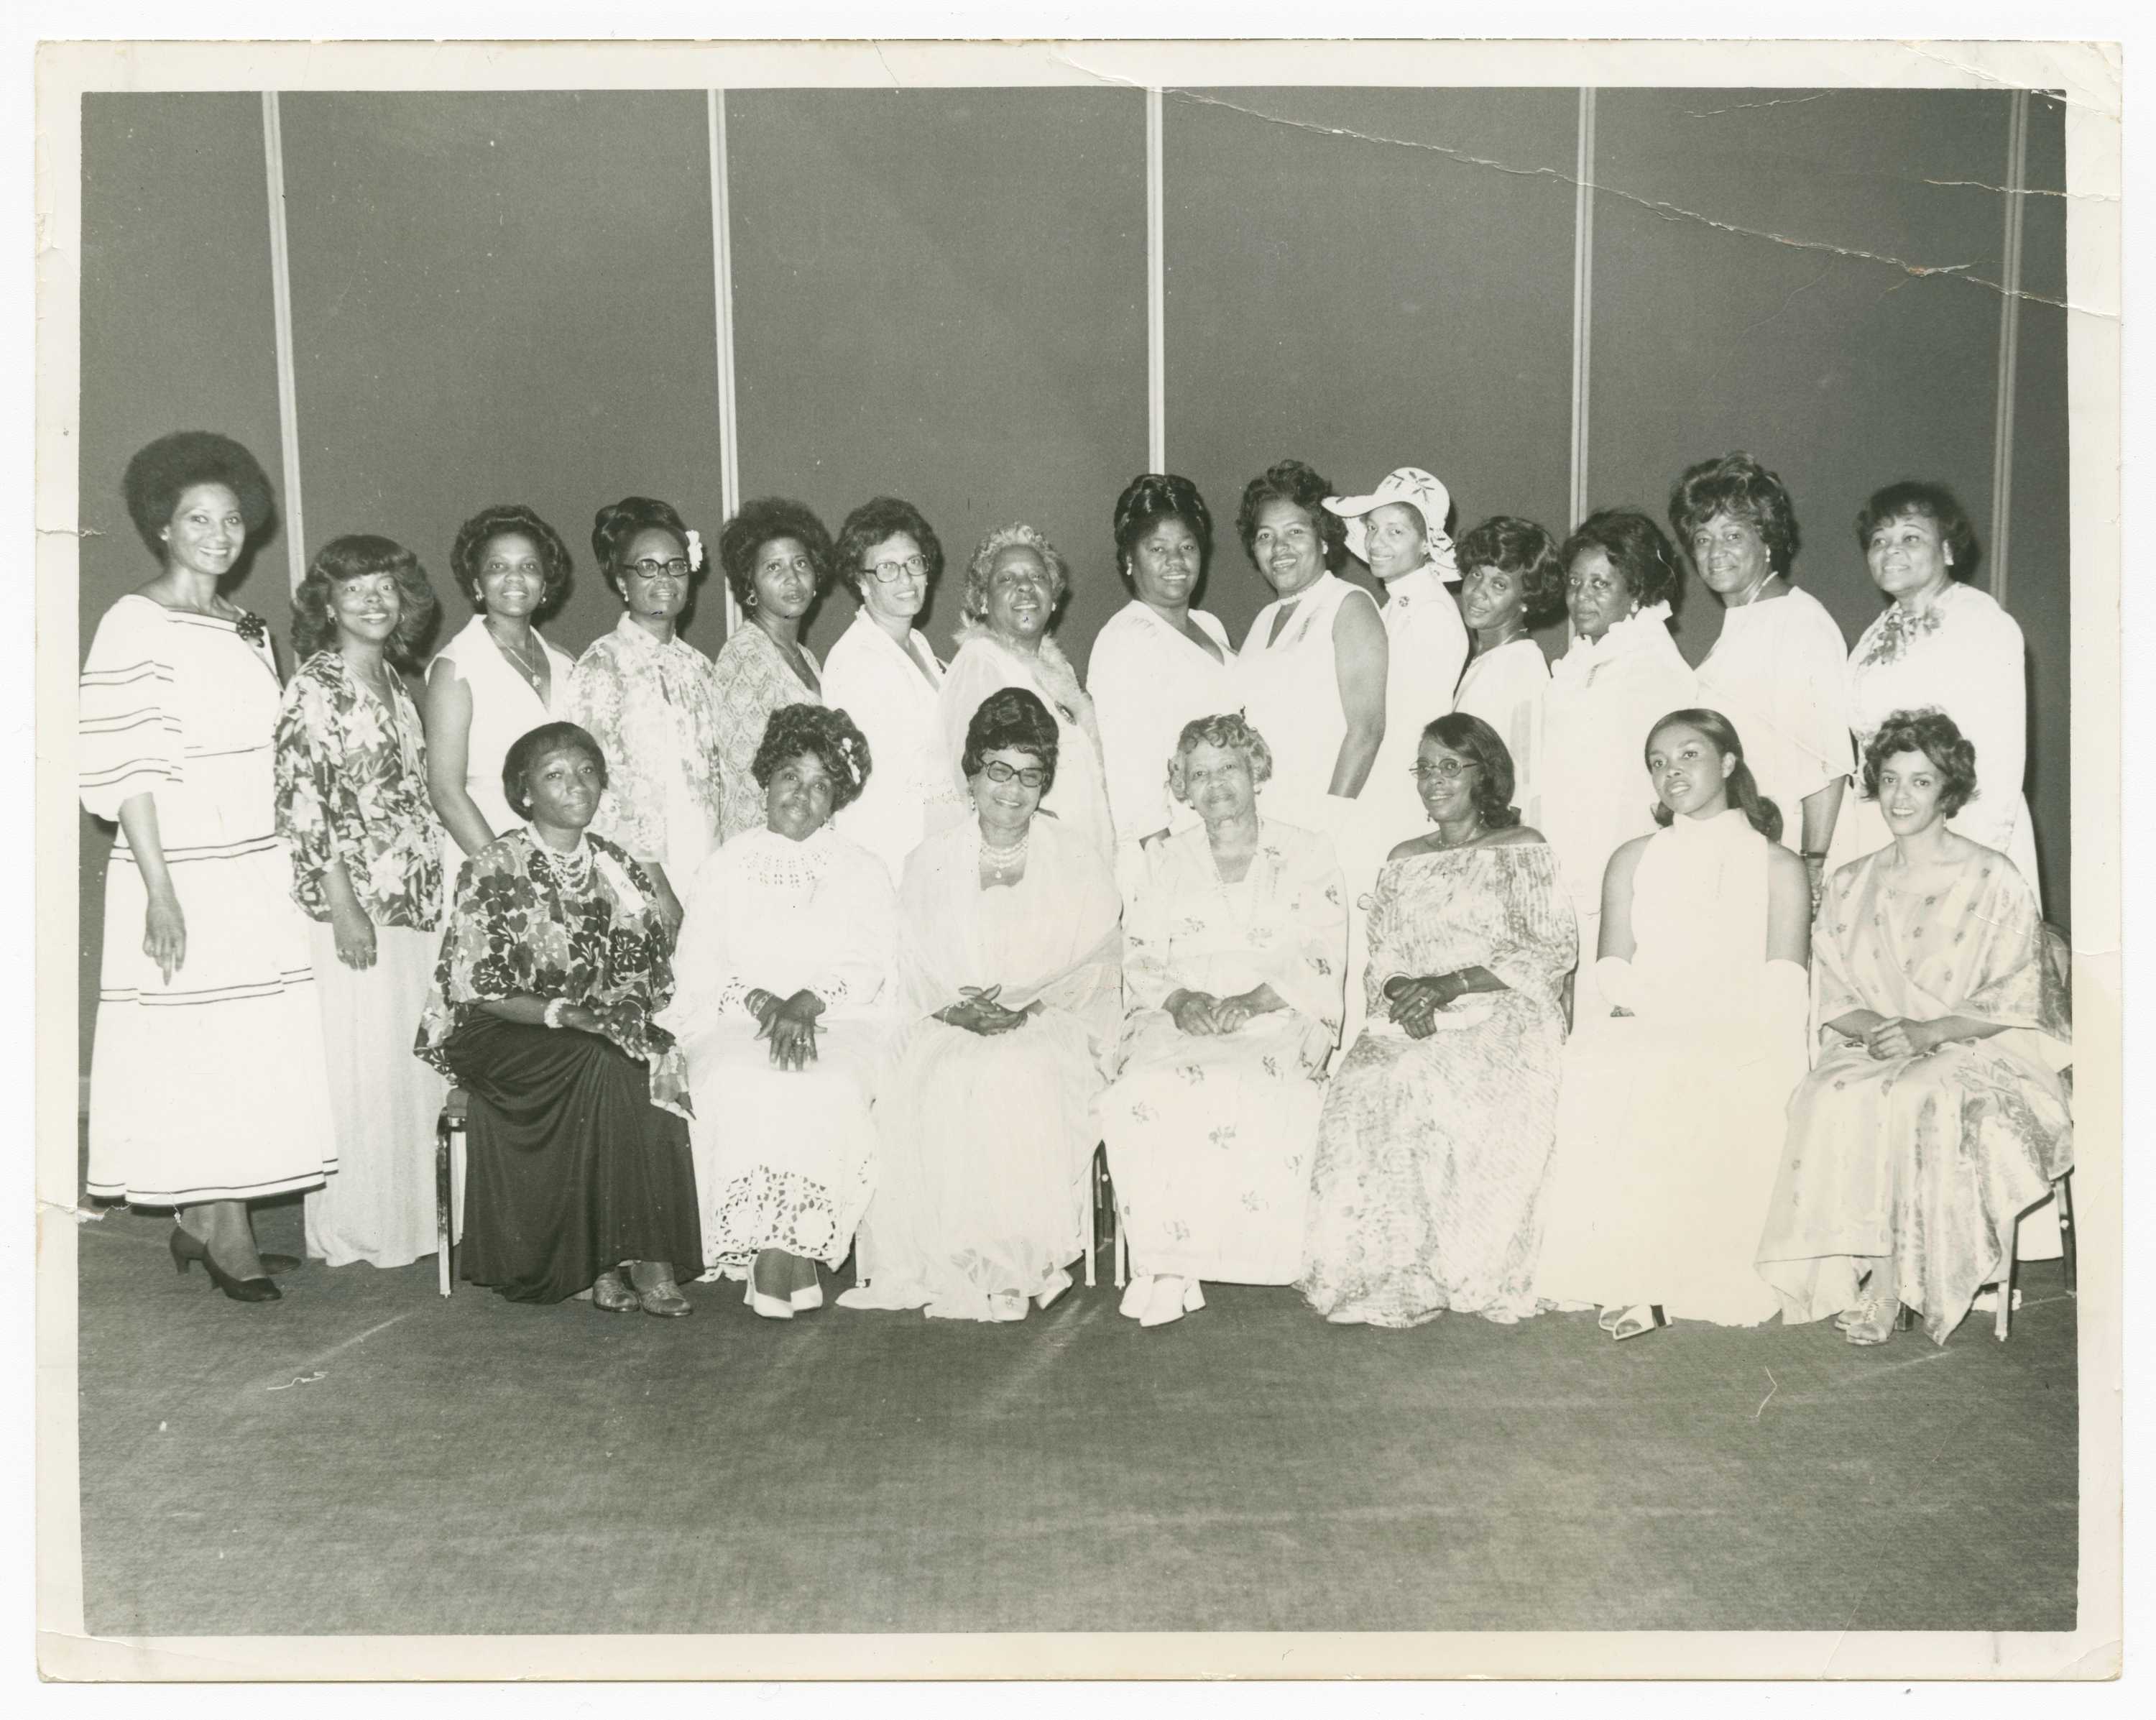 Black and white image of two (2) rows of women. The front row includes seven (7) seated women. The row behind includes fourteen (14) women standing. The women wear a variety of dresses in different styles. Many of the dresses are patterned or with floral prints. One woman wears a hat and stands fifth from the right in the back row. The women are all in a large interior space. On the reverse are a variety of marks. One large angular mark takes up a large portion of the back from the upper right corner to the lower left corner and down to the lower right corner. Along the top half of the back is the image caption with additional numbers and notes. [Ushers for FAMEs 100th Anniversary / Sent" / "Church / 7-28-77 / 4Cals/Hostesses]. In the lower right corner are two (2) stamps with the photographer information and the date [PLEASE CREDIT PHOTO / BY / HARRY H. ADAMS / 4300 SO. CENTRAL AVE. / LOS ANGELES, CALIF. 90011/235-2742 / JUN 1977].